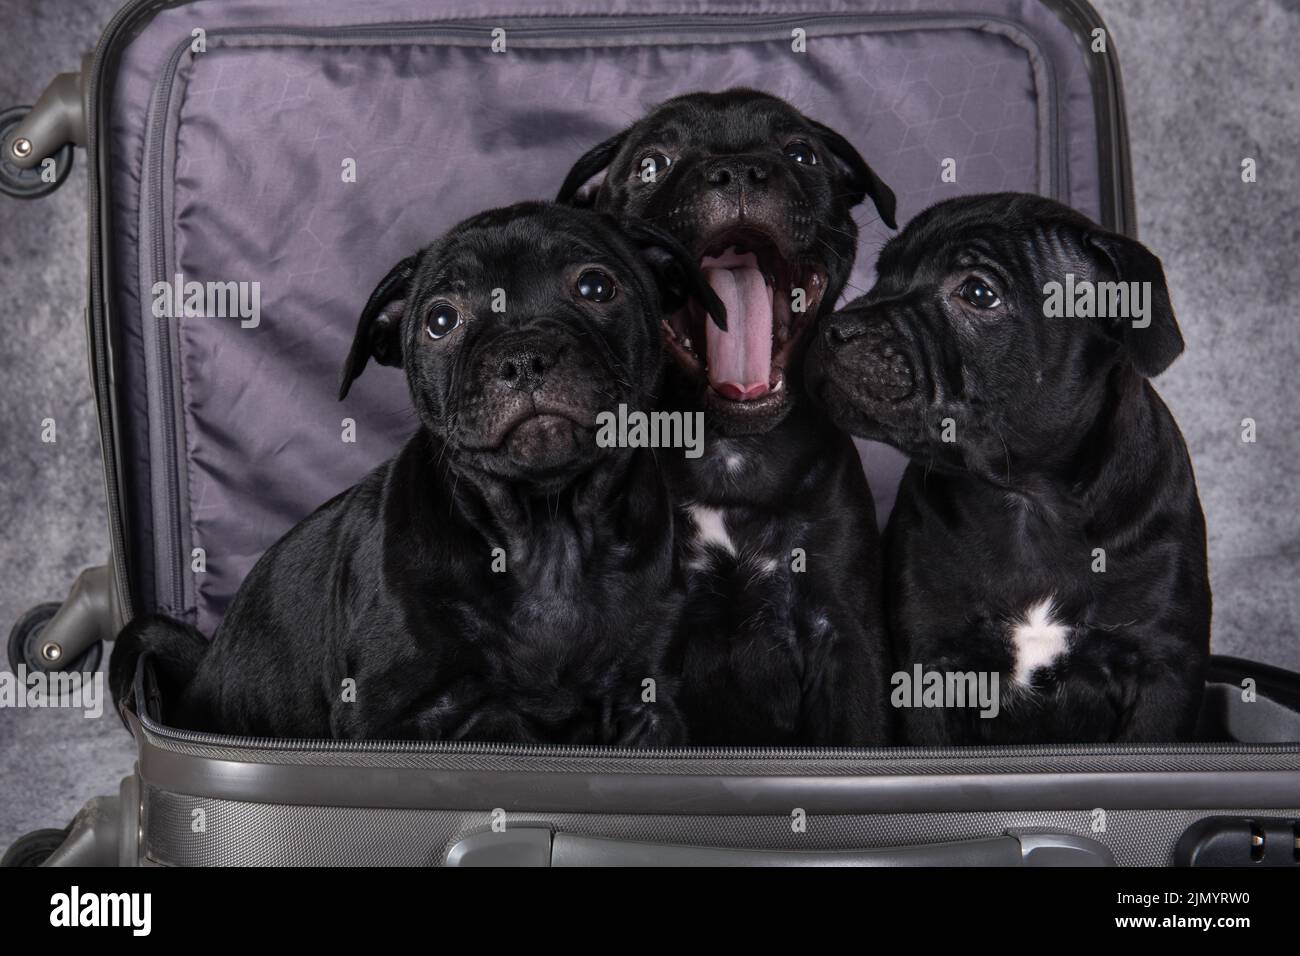 Black American Staffordshire Bull Terrier dogs puppies in a suitcas on gray background Stock Photo